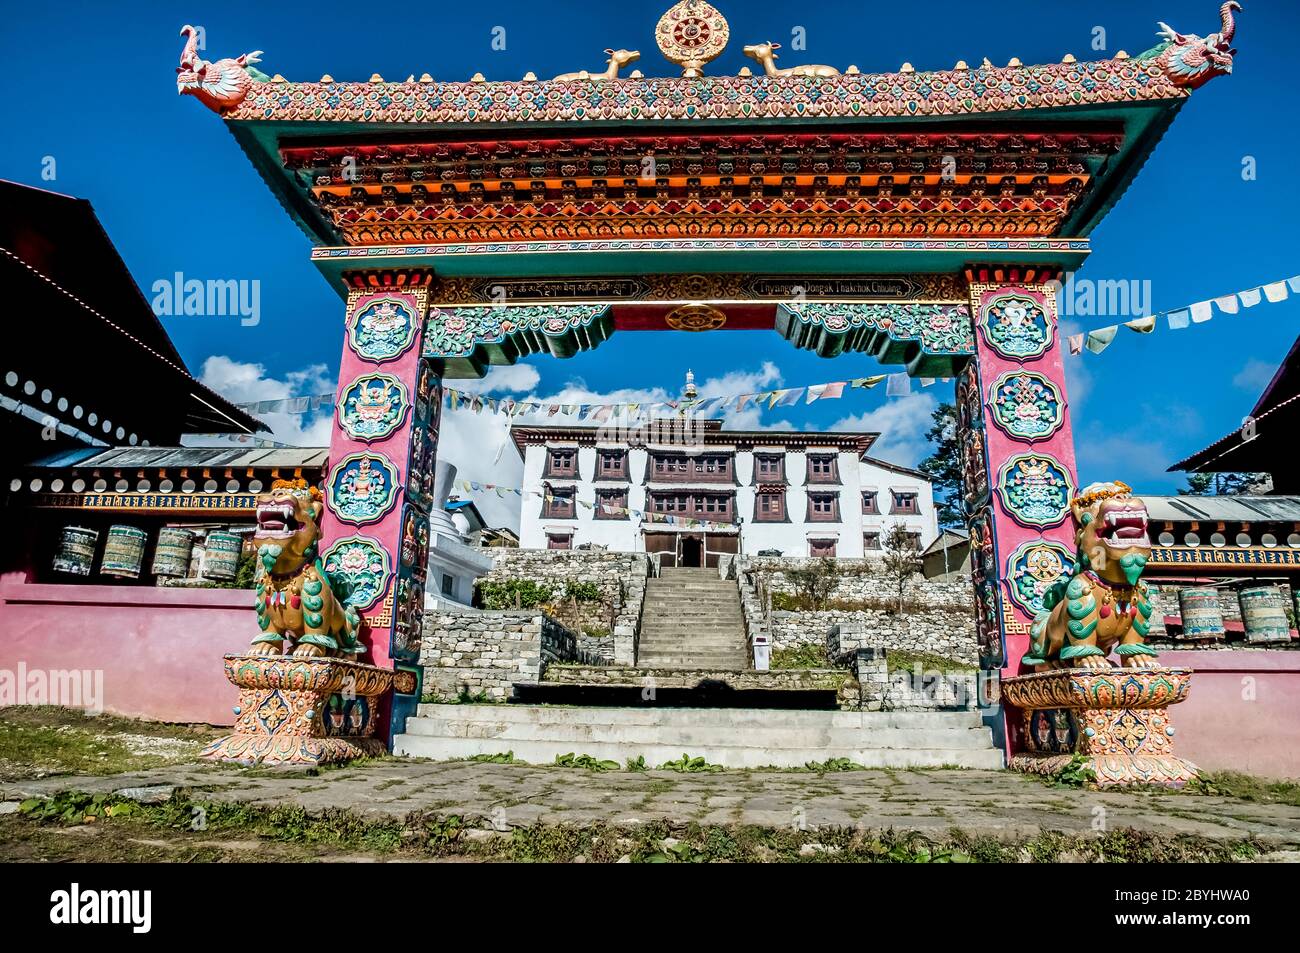 Nepal. Trek to Island Peak. Colourful scenes in and around the Thyangboche Buddhist Monastery with the highly decorated arched portal gateway leading to the monastery complex Stock Photo